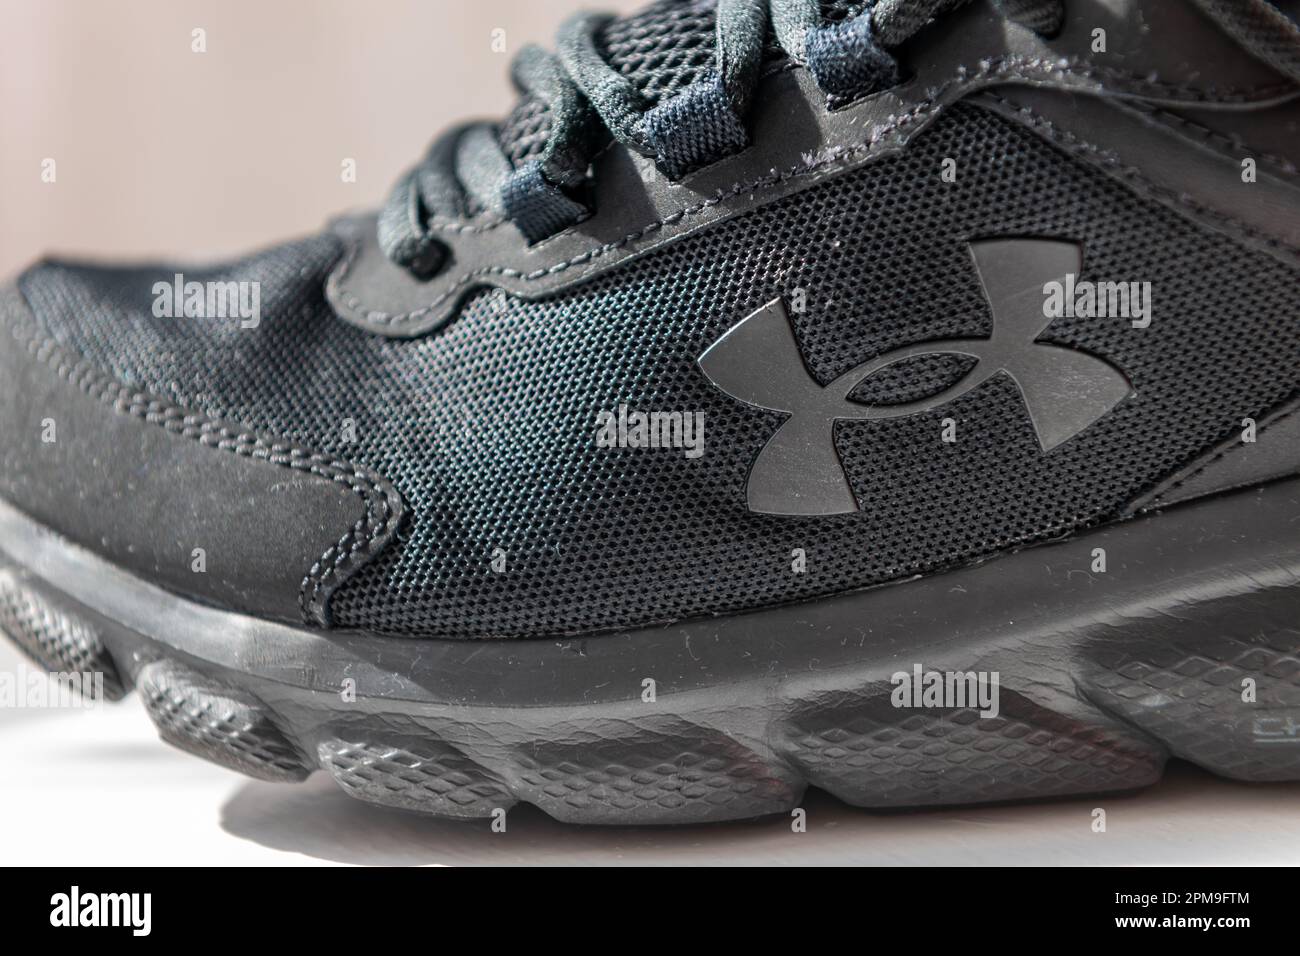 London. UK- 04.09.2023. Close up of a Under Armour running shoe showing the company logo, trademark. Stock Photo